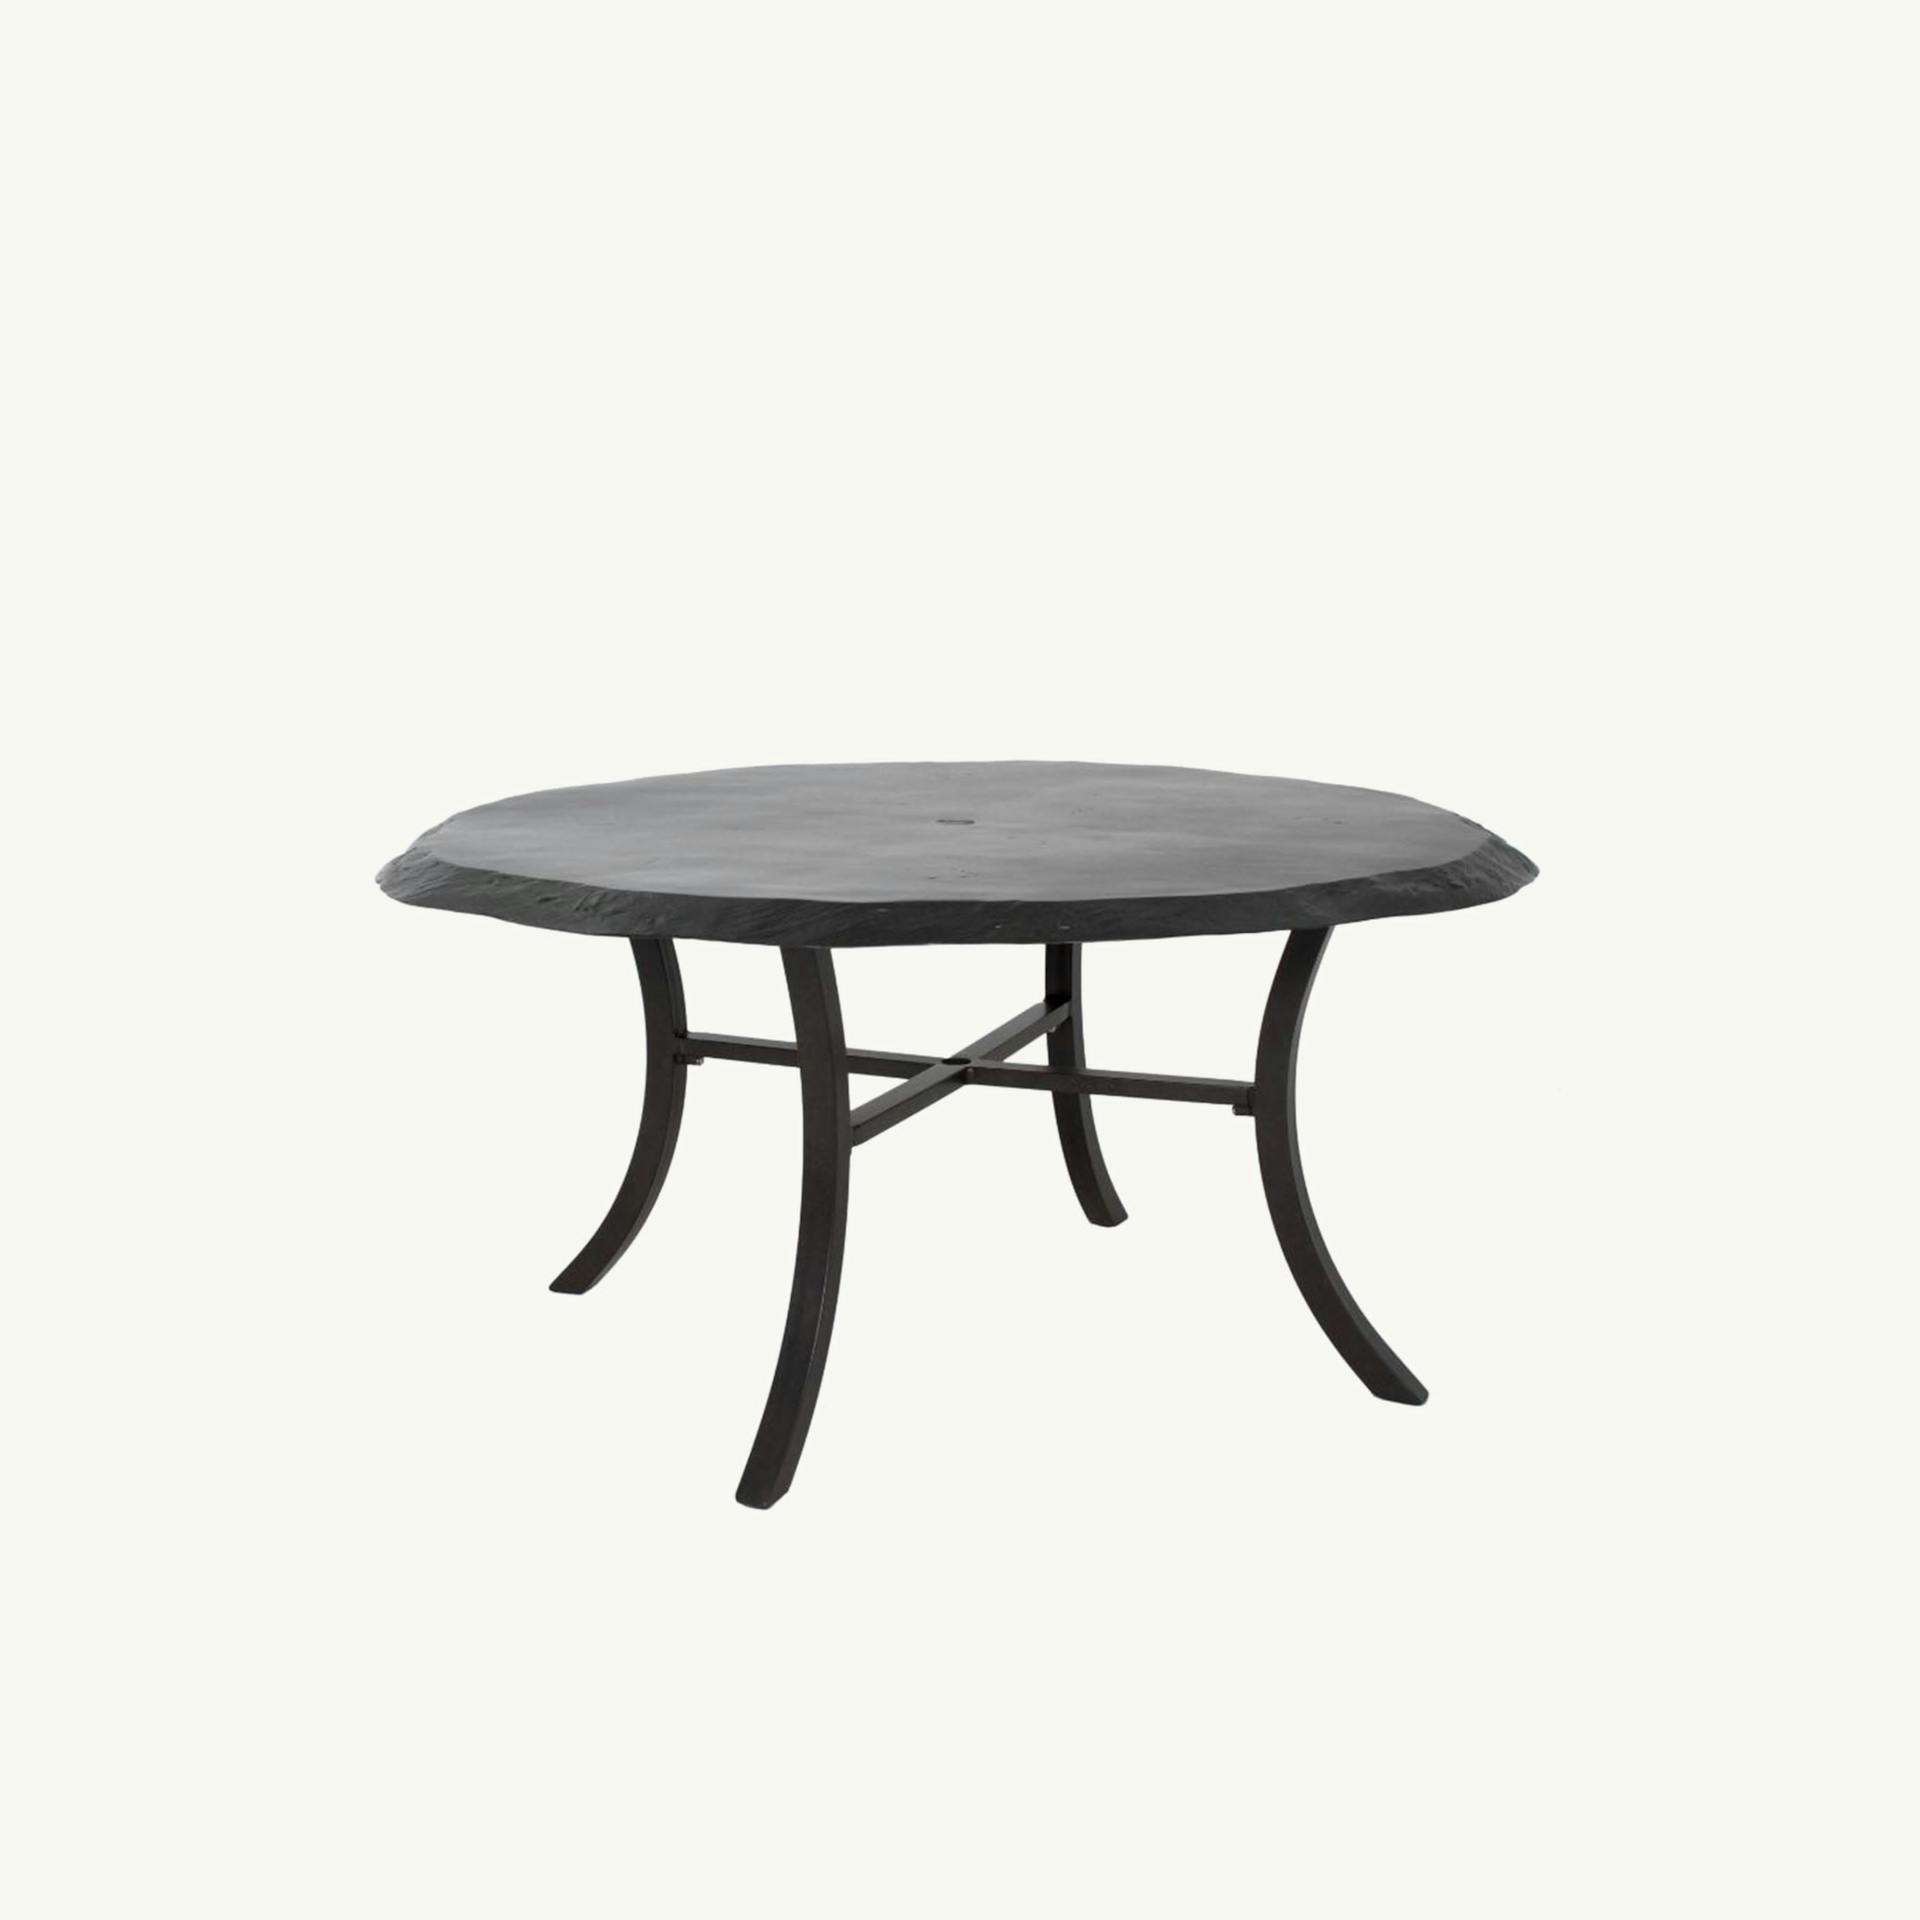 Classical 64" Round Dining Table